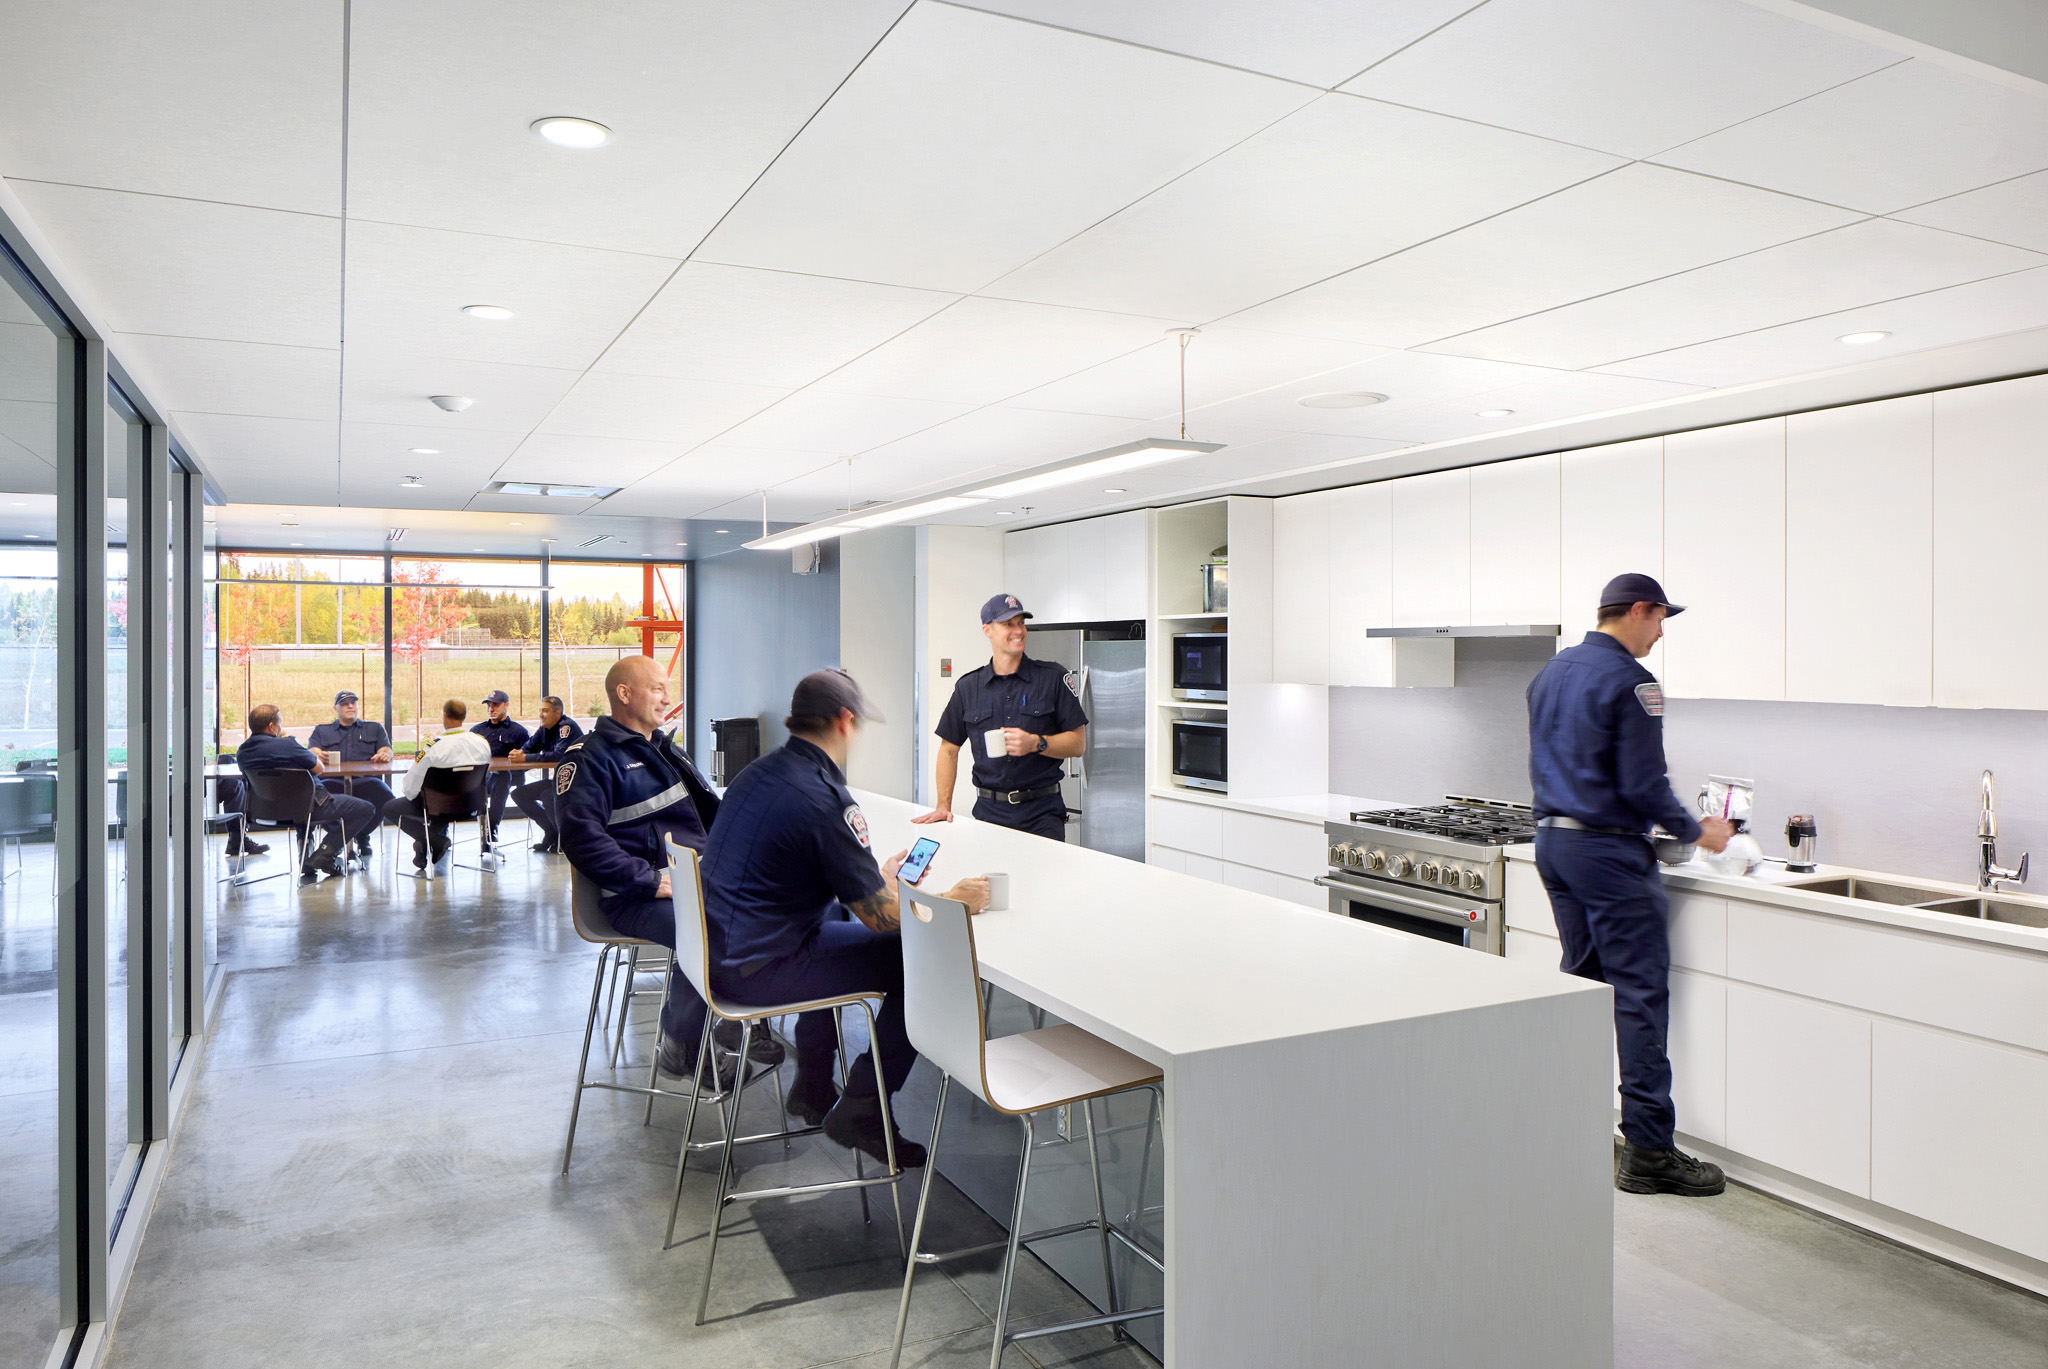 Firefighters in Kitchen And Dining Area Of Modern Firehall